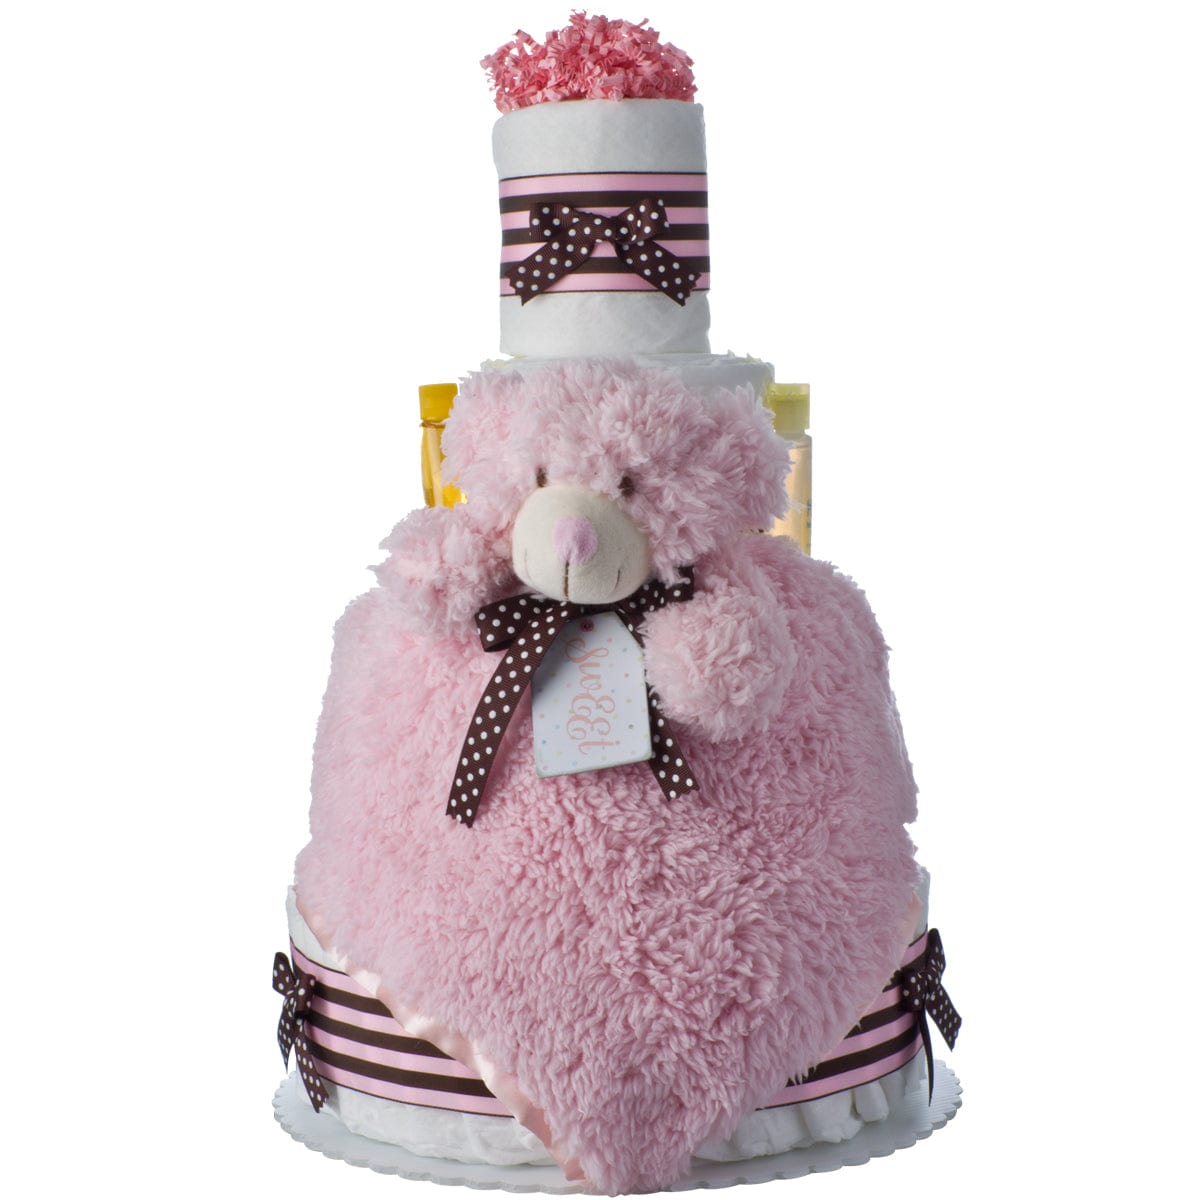 Lil' Baby Cakes Lil' Pink Bear 4 Tier Baby Diaper Cake